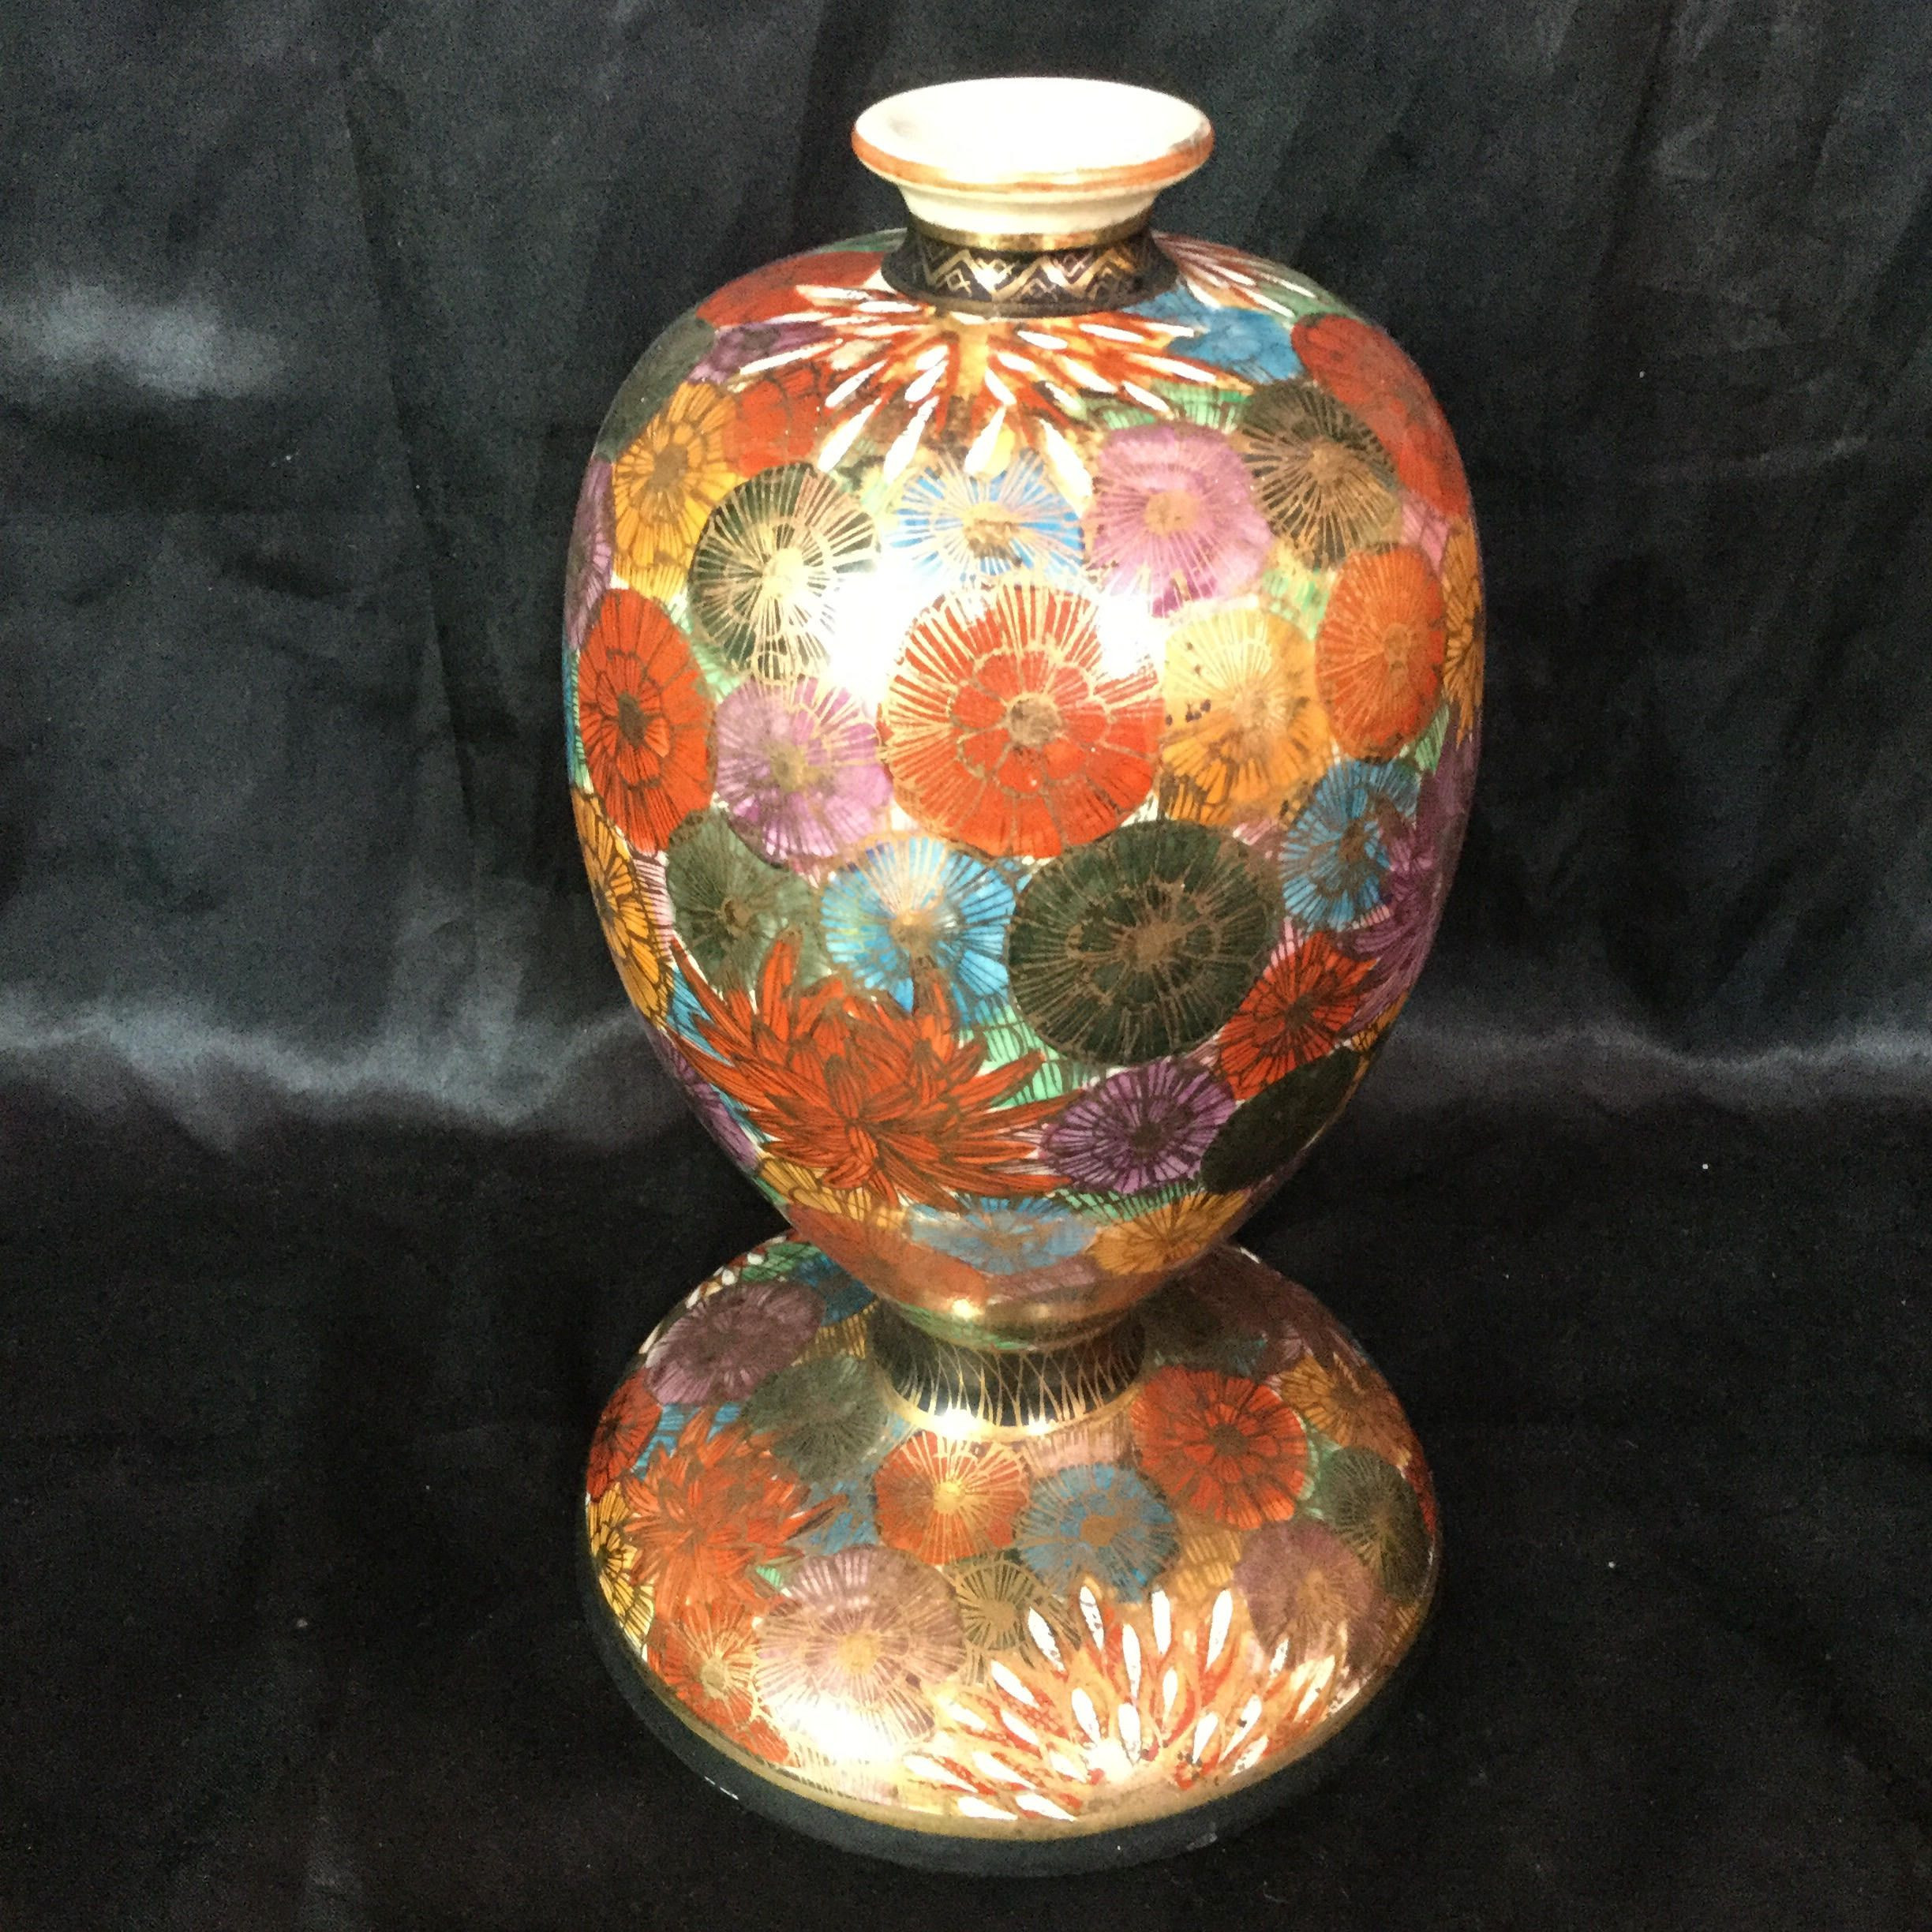 26 Unique Satsuma Moriage Vase 2024 free download satsuma moriage vase of a stunning and colourful japanese vase lamp by uniquepotteryshop within a stunning and colourful japanese vase lamp by uniquepotteryshop on etsy